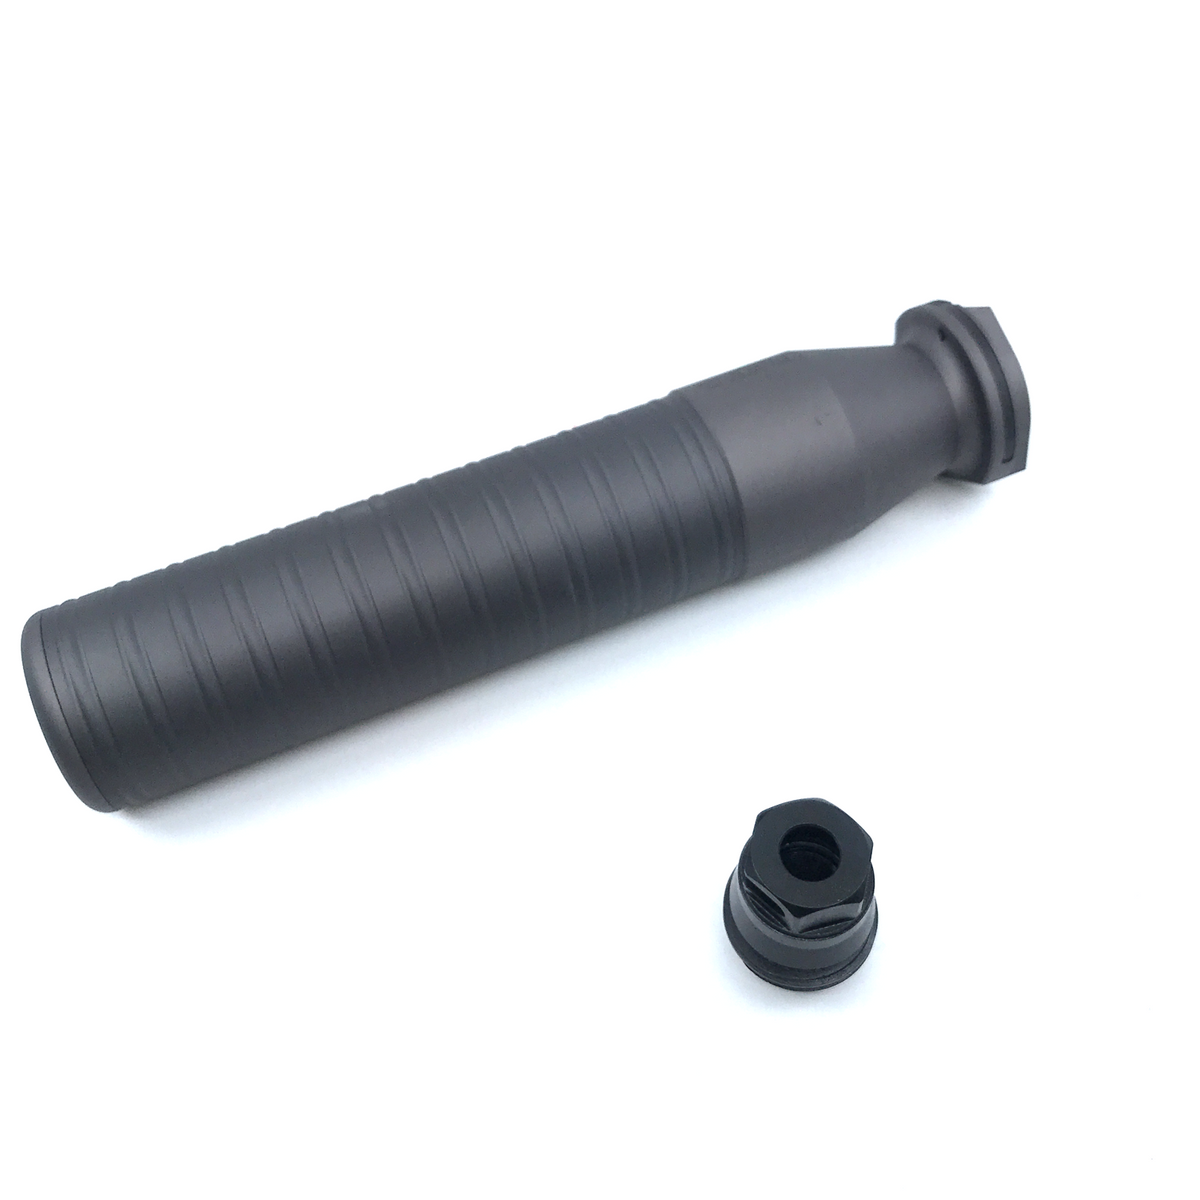 AIRSOFT ARTISAN MCX 762Ti Style QD Silencer with Taper-Lok Muzzle